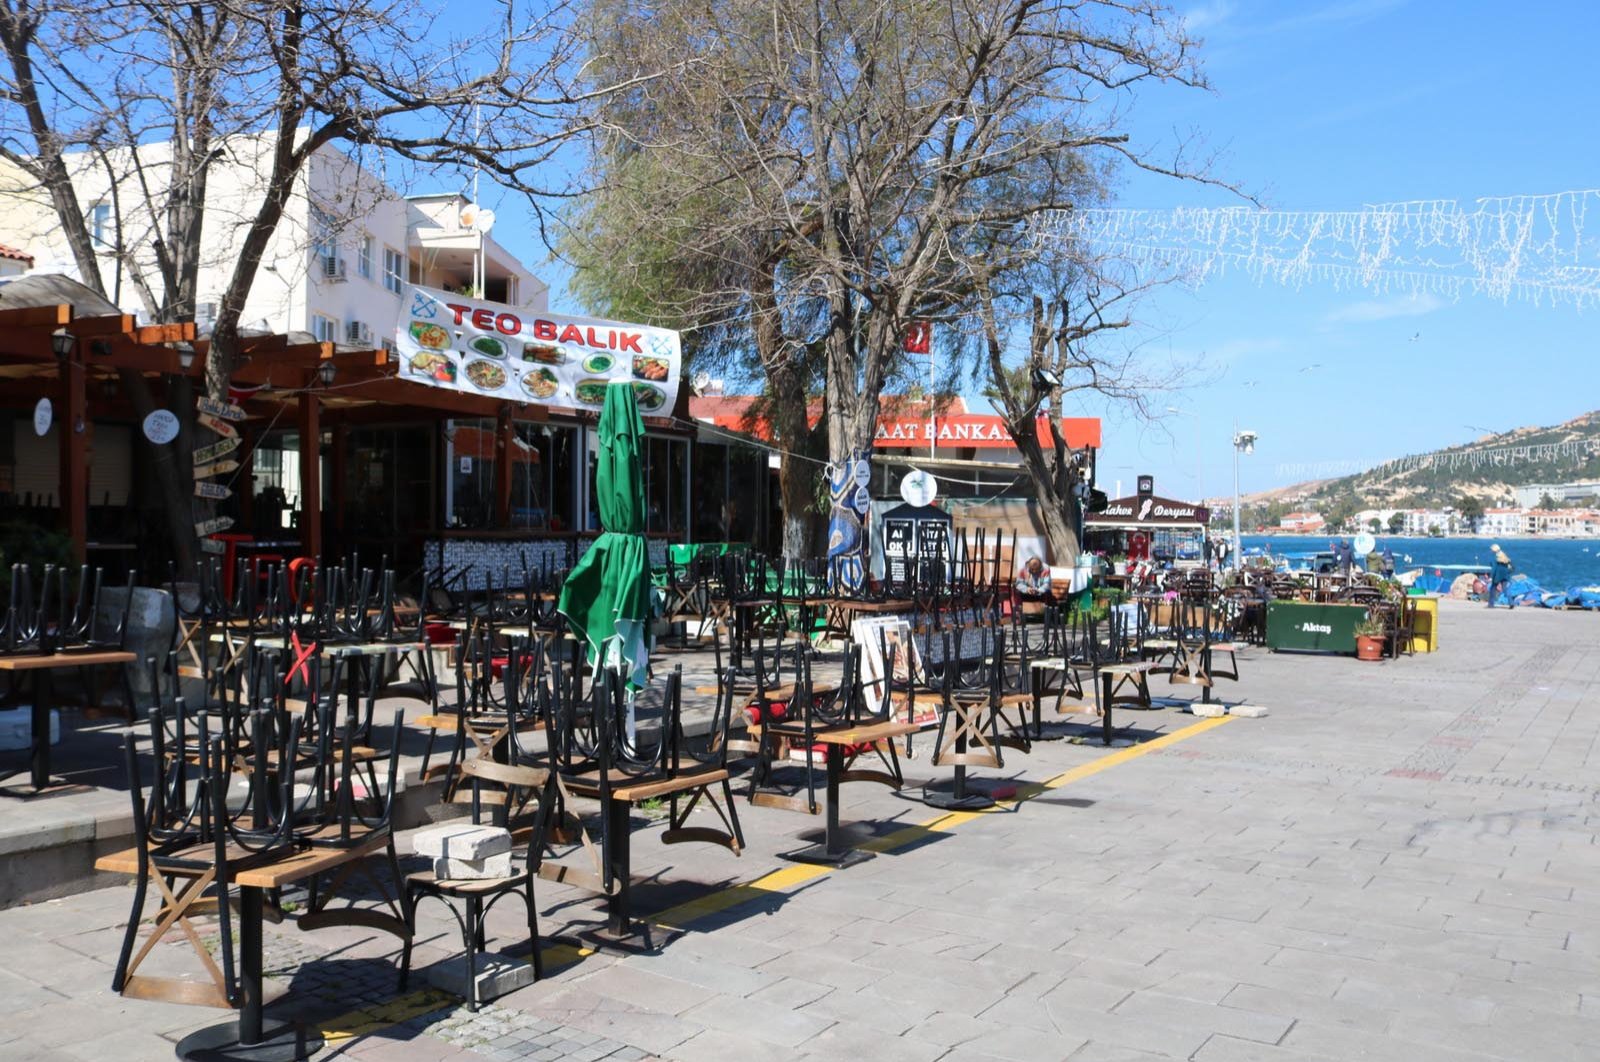 İzmir's touristic Foça district on March 18. Most public places remain empty due to fears of the COVID-19 epidemic.